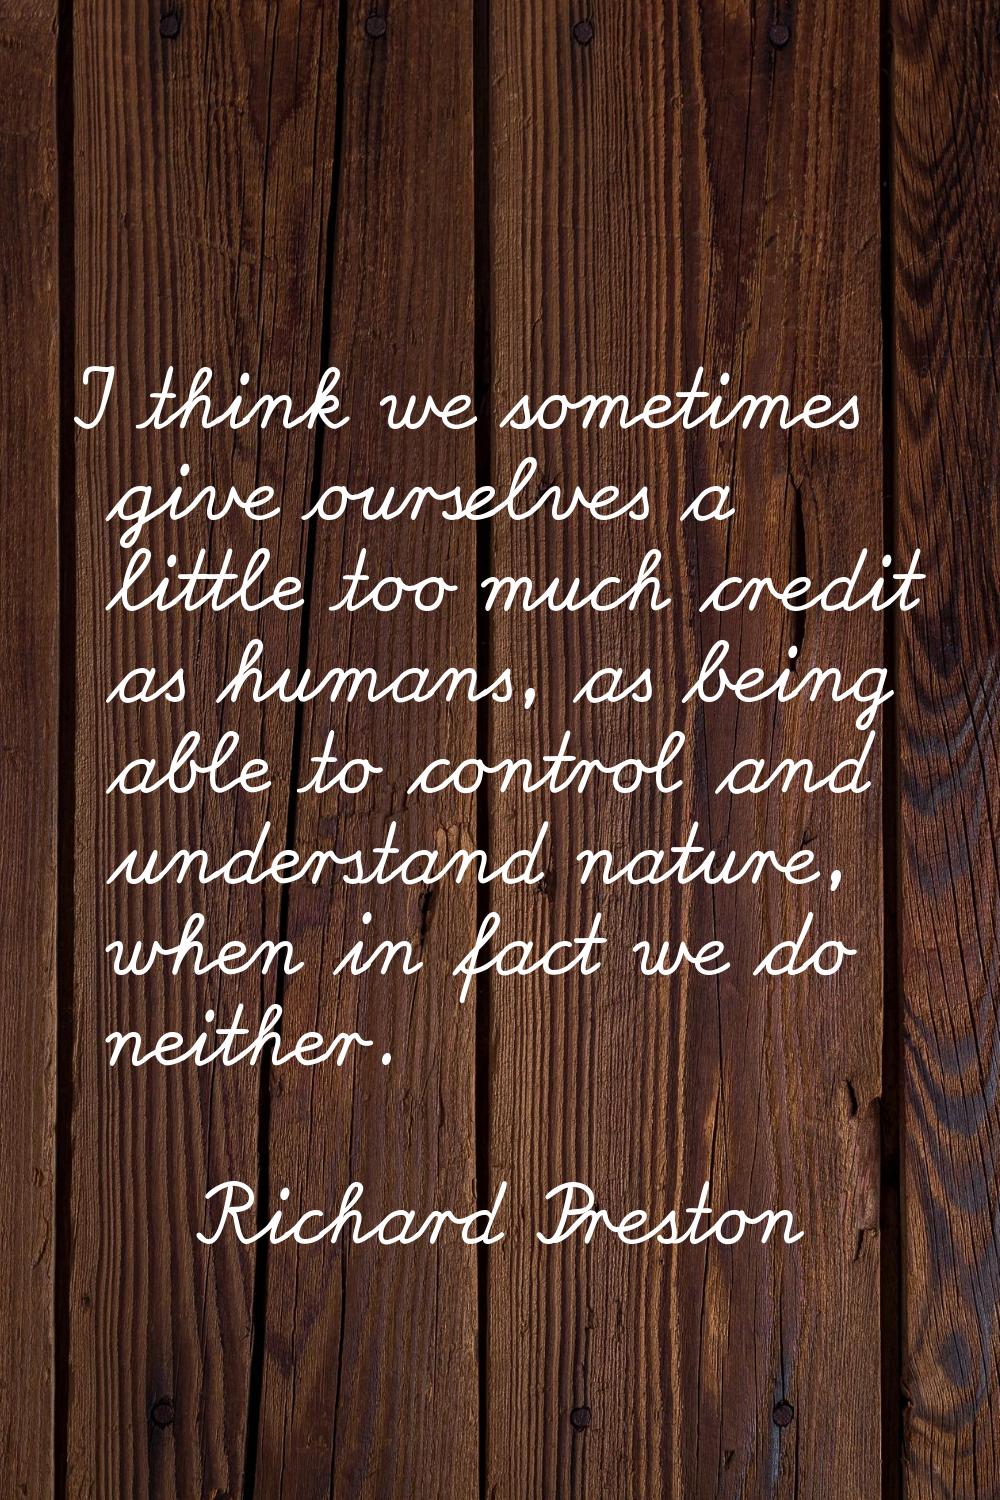 I think we sometimes give ourselves a little too much credit as humans, as being able to control an